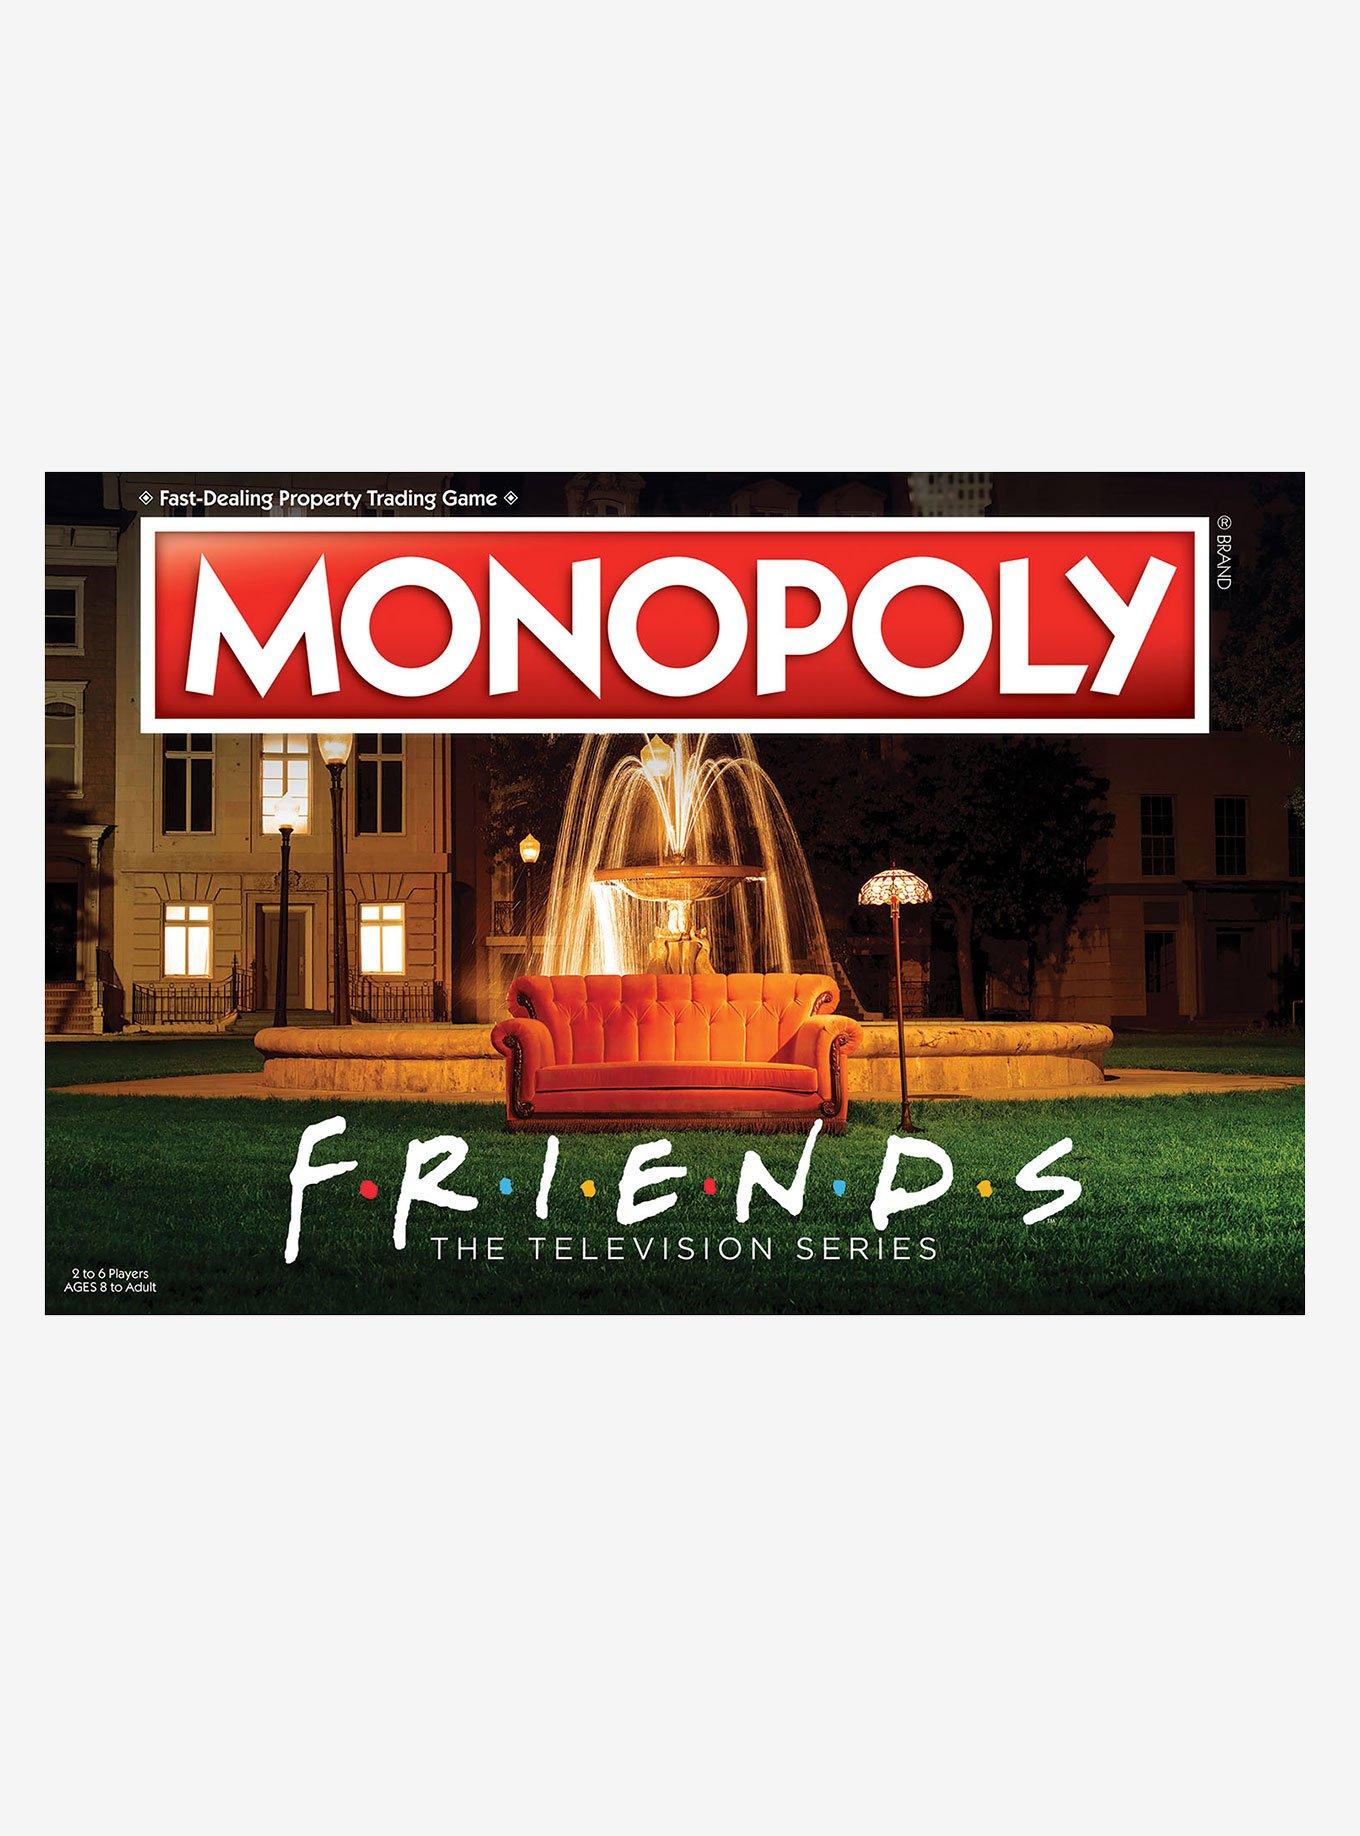 Friends Edition Monopoly Board Game Hot Topic Exclusive, , alternate